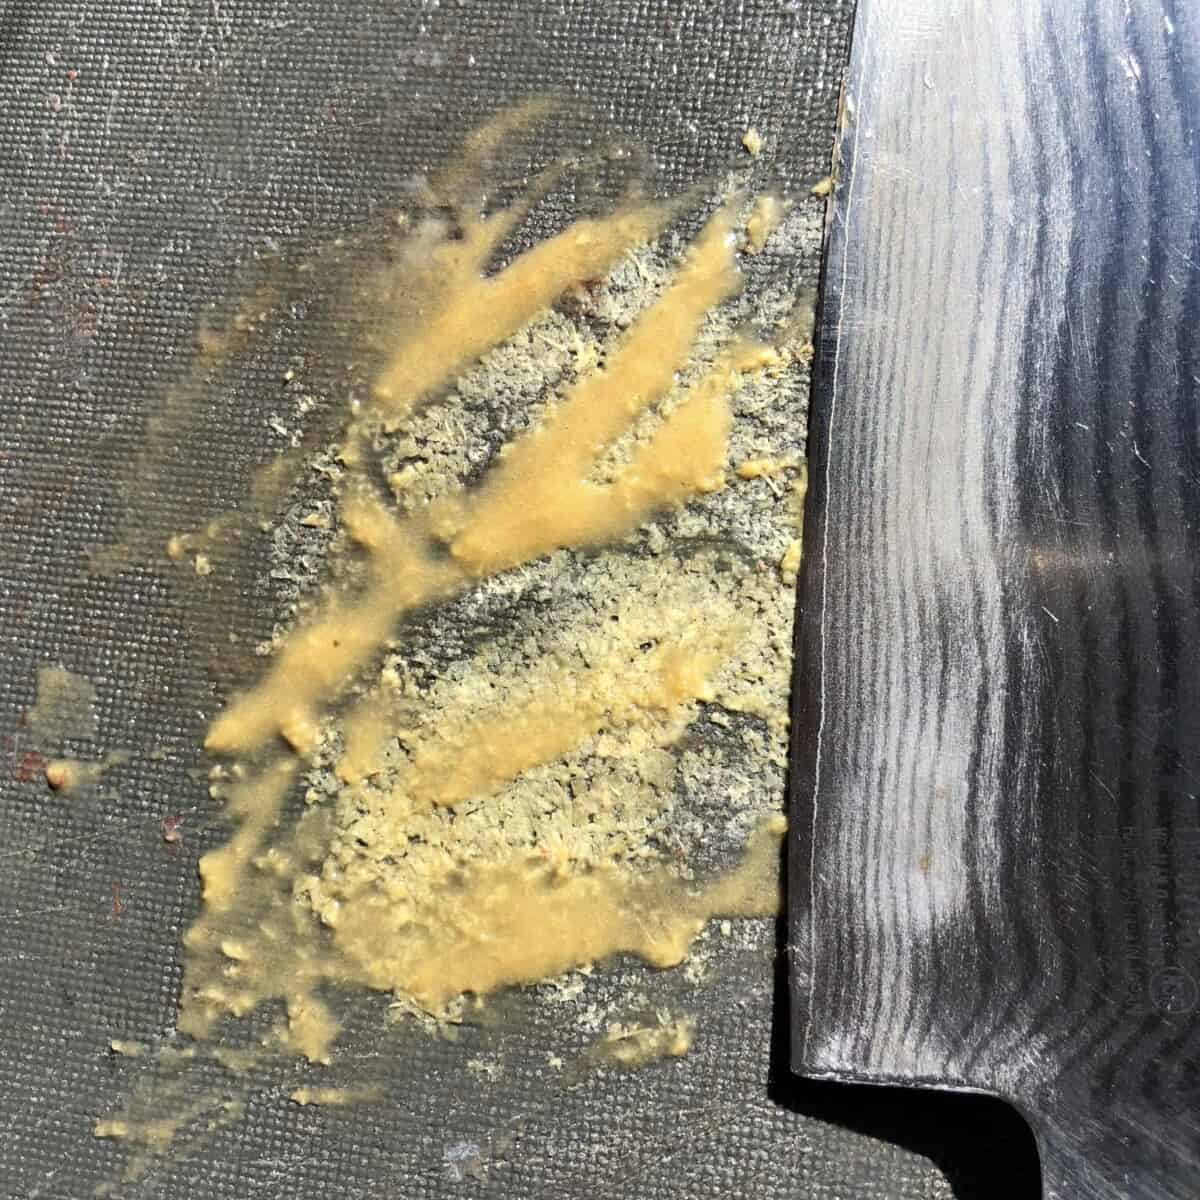 ginger turned into a paste using the back of a knife to scrape it on a cutting board